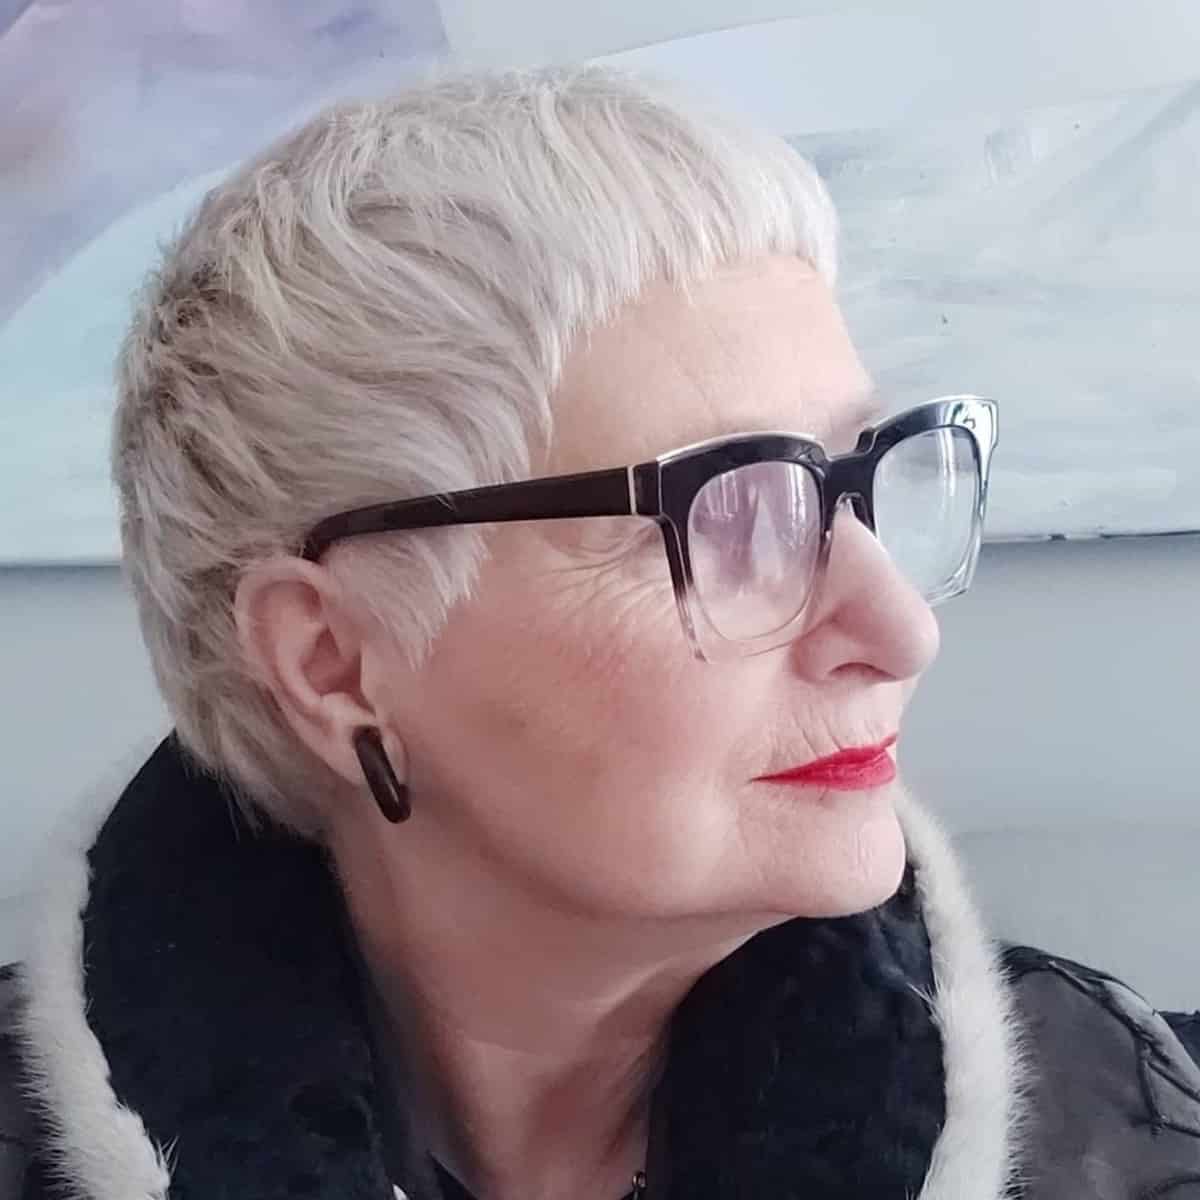 33 Flattering Short Hairstyles for Women Over 60 with Glasses